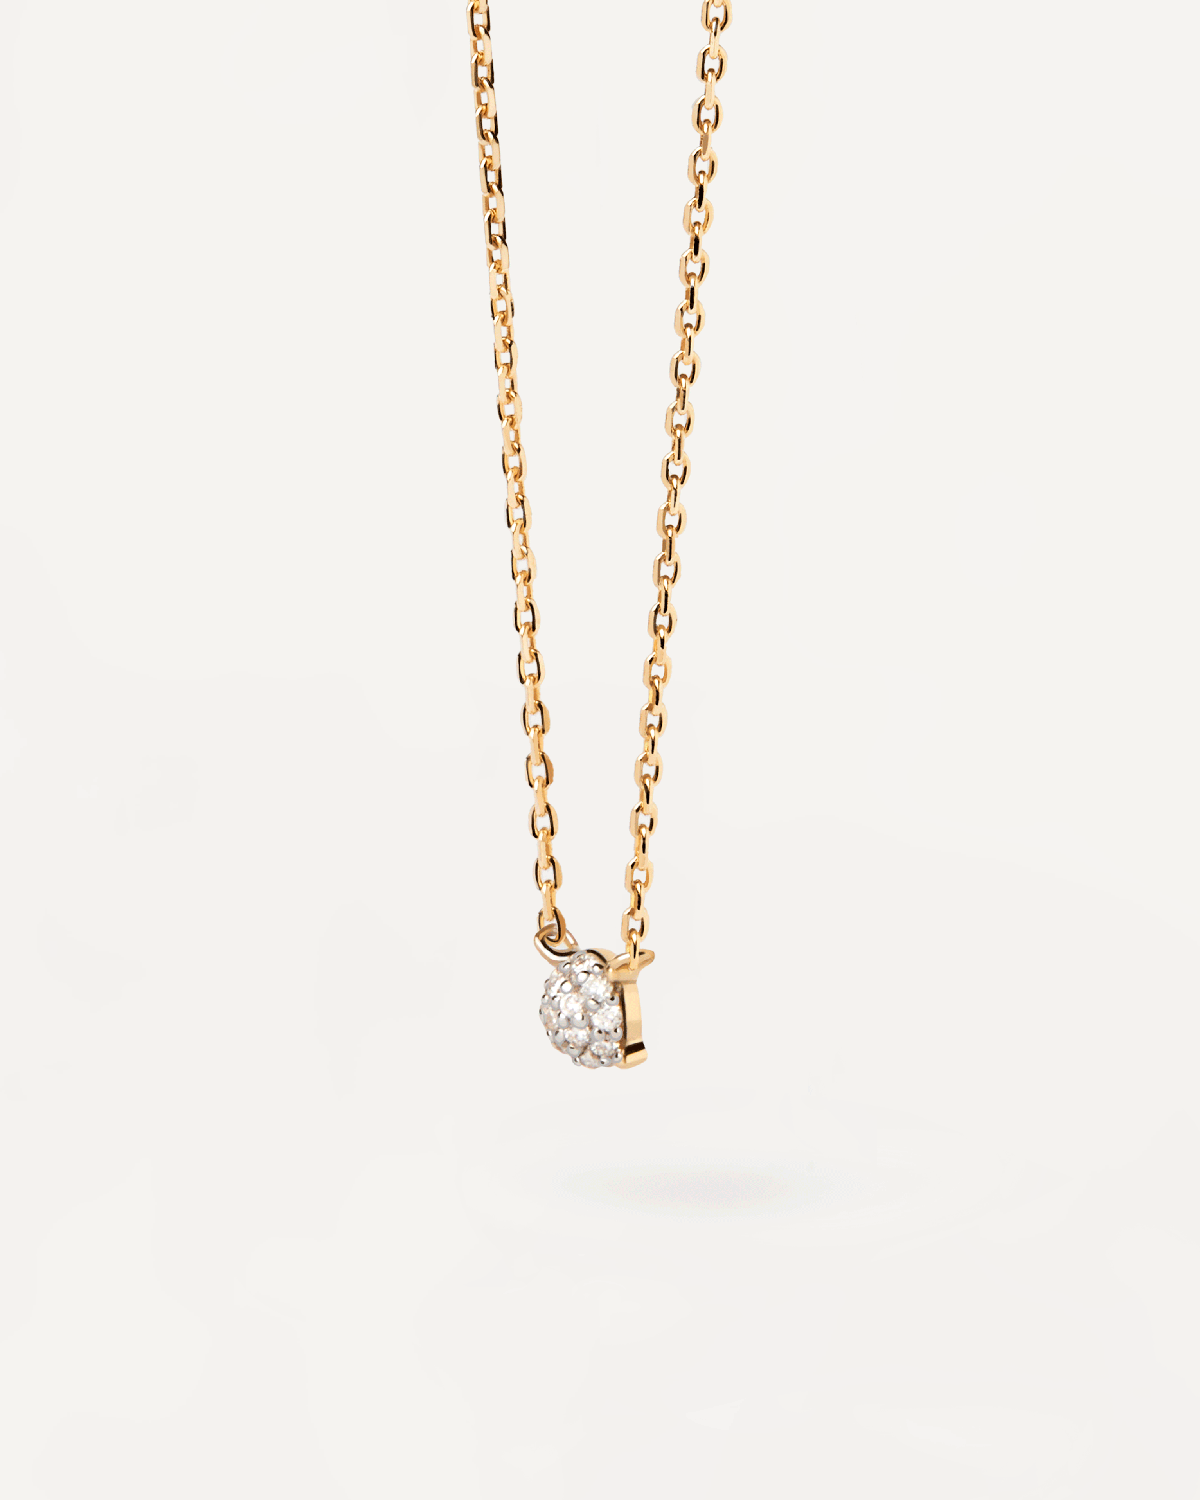 Diamonds and gold Dona solitary necklace. Solid yellow gold round solitary necklace with a four-prong pavé lab-grown diamond . Get the latest arrival from PDPAOLA. Place your order safely and get this Best Seller.